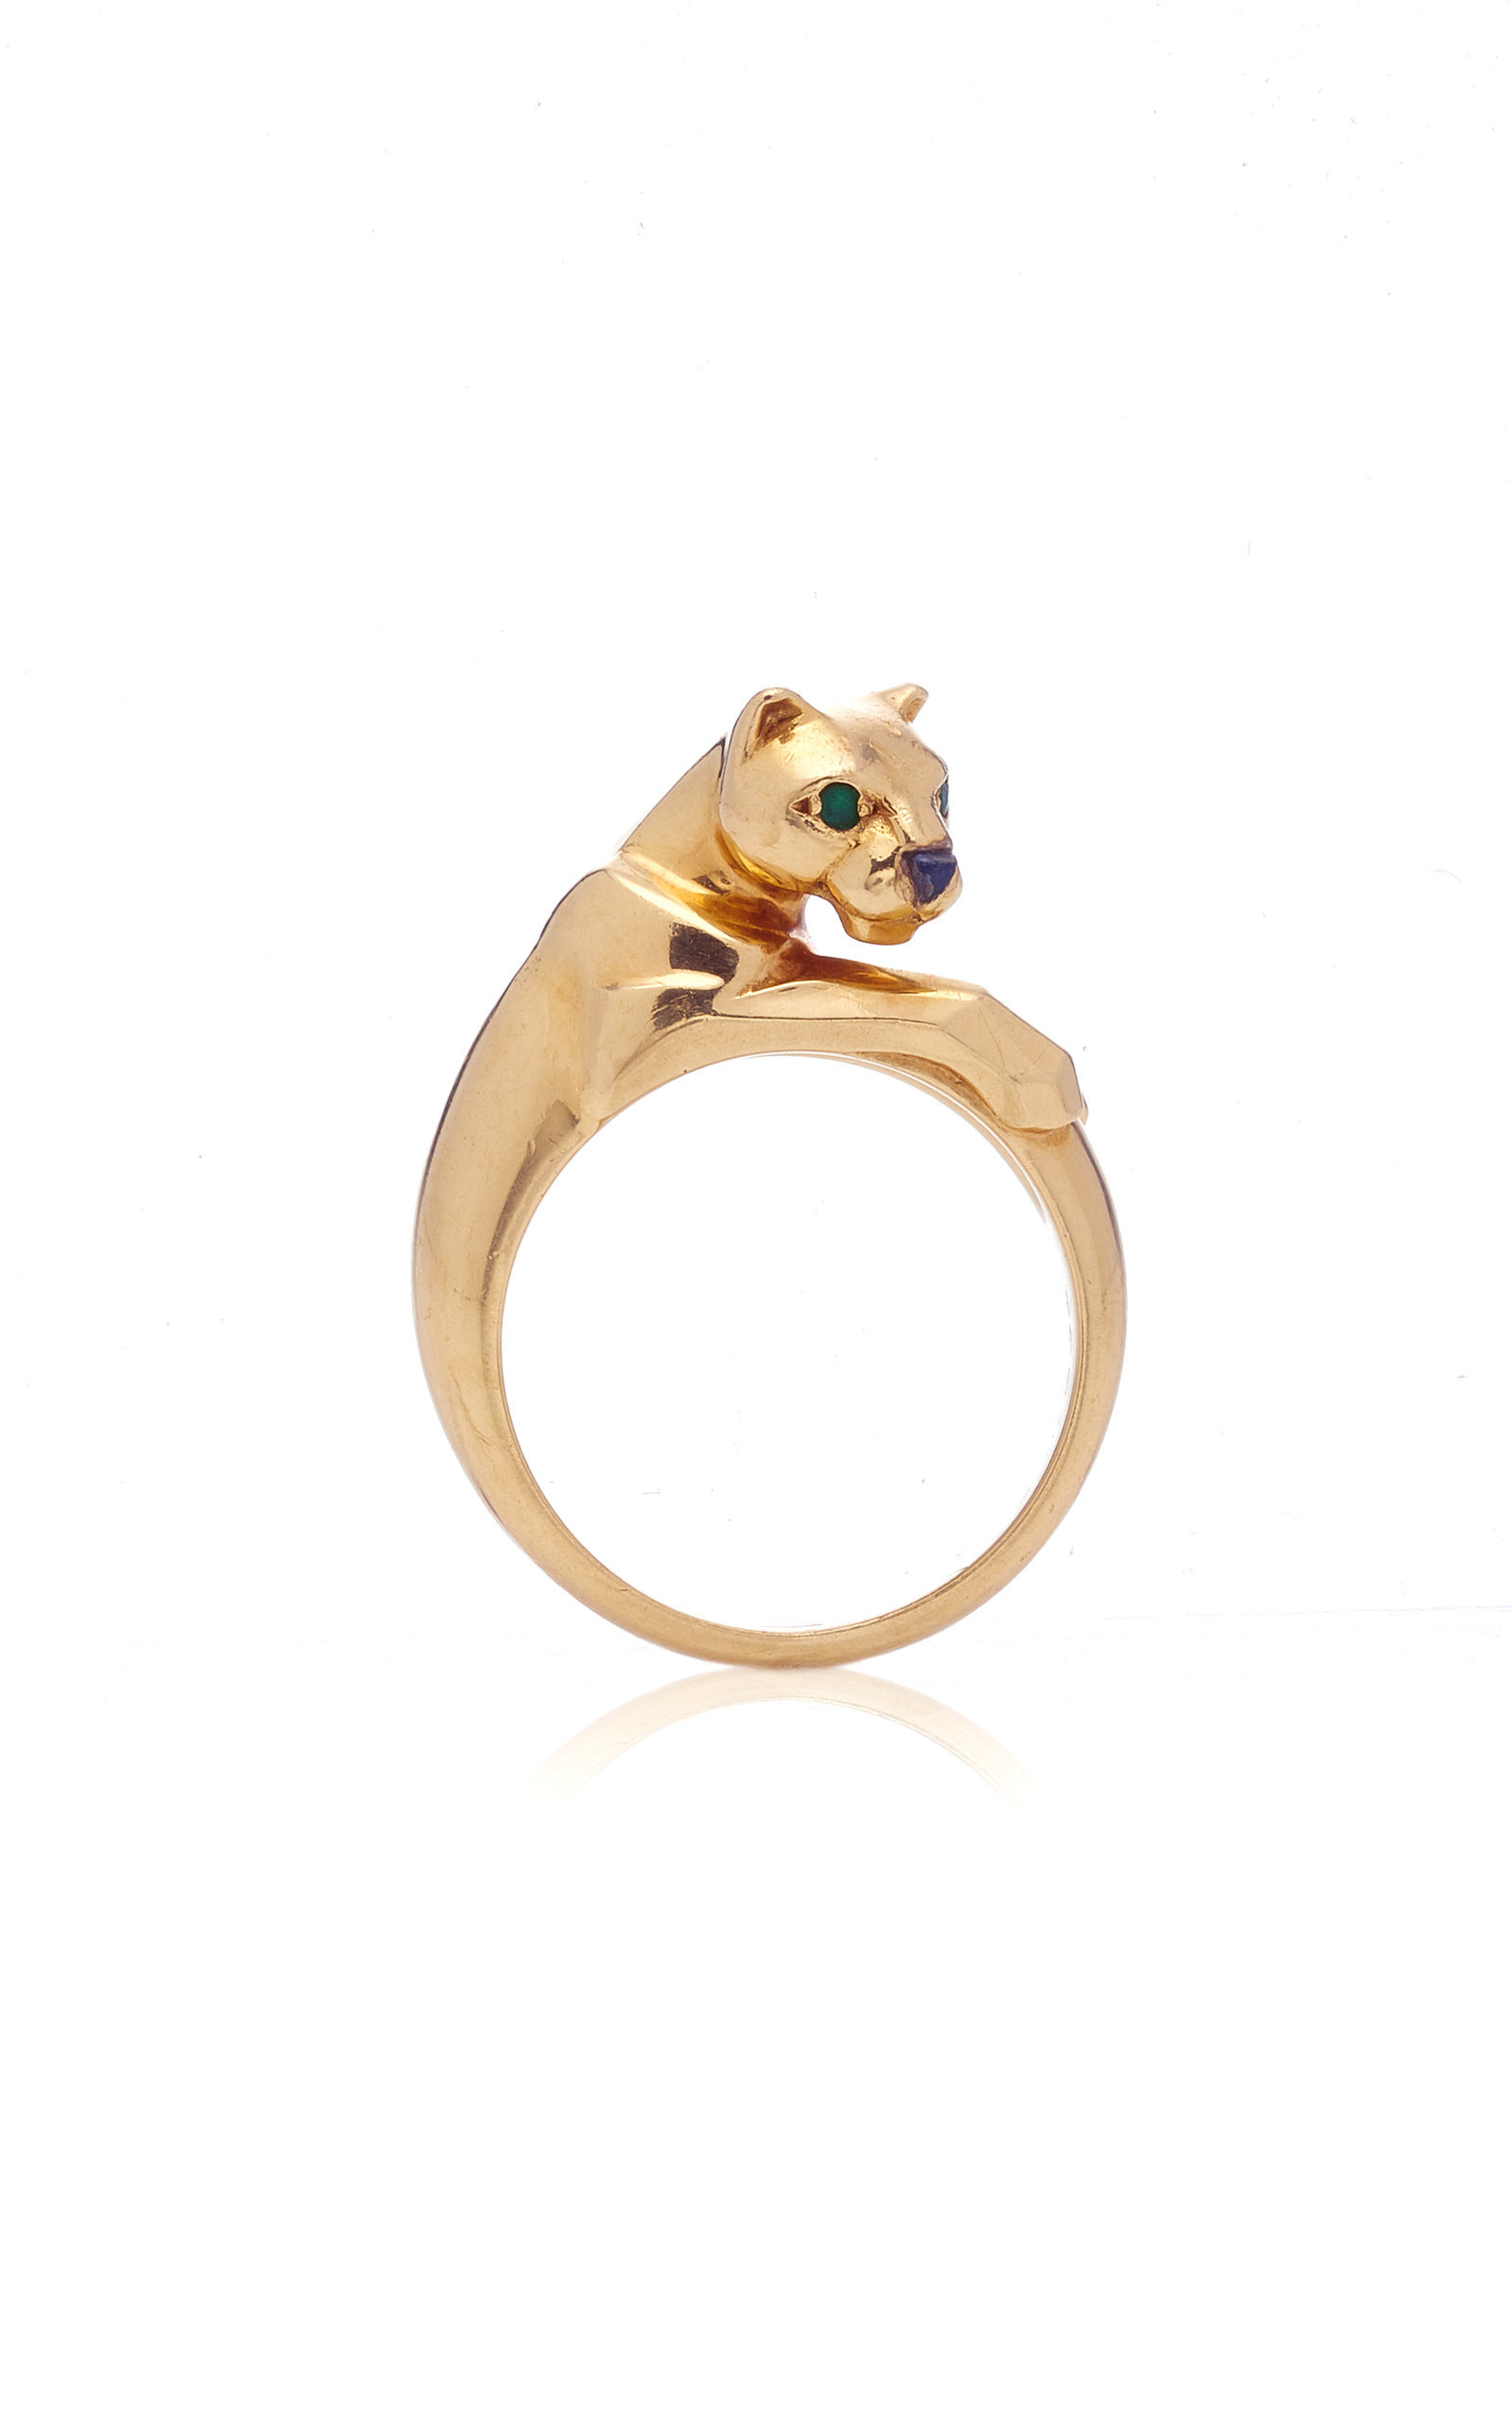 Discover more than 147 panther rings for sale super hot -  awesomeenglish.edu.vn